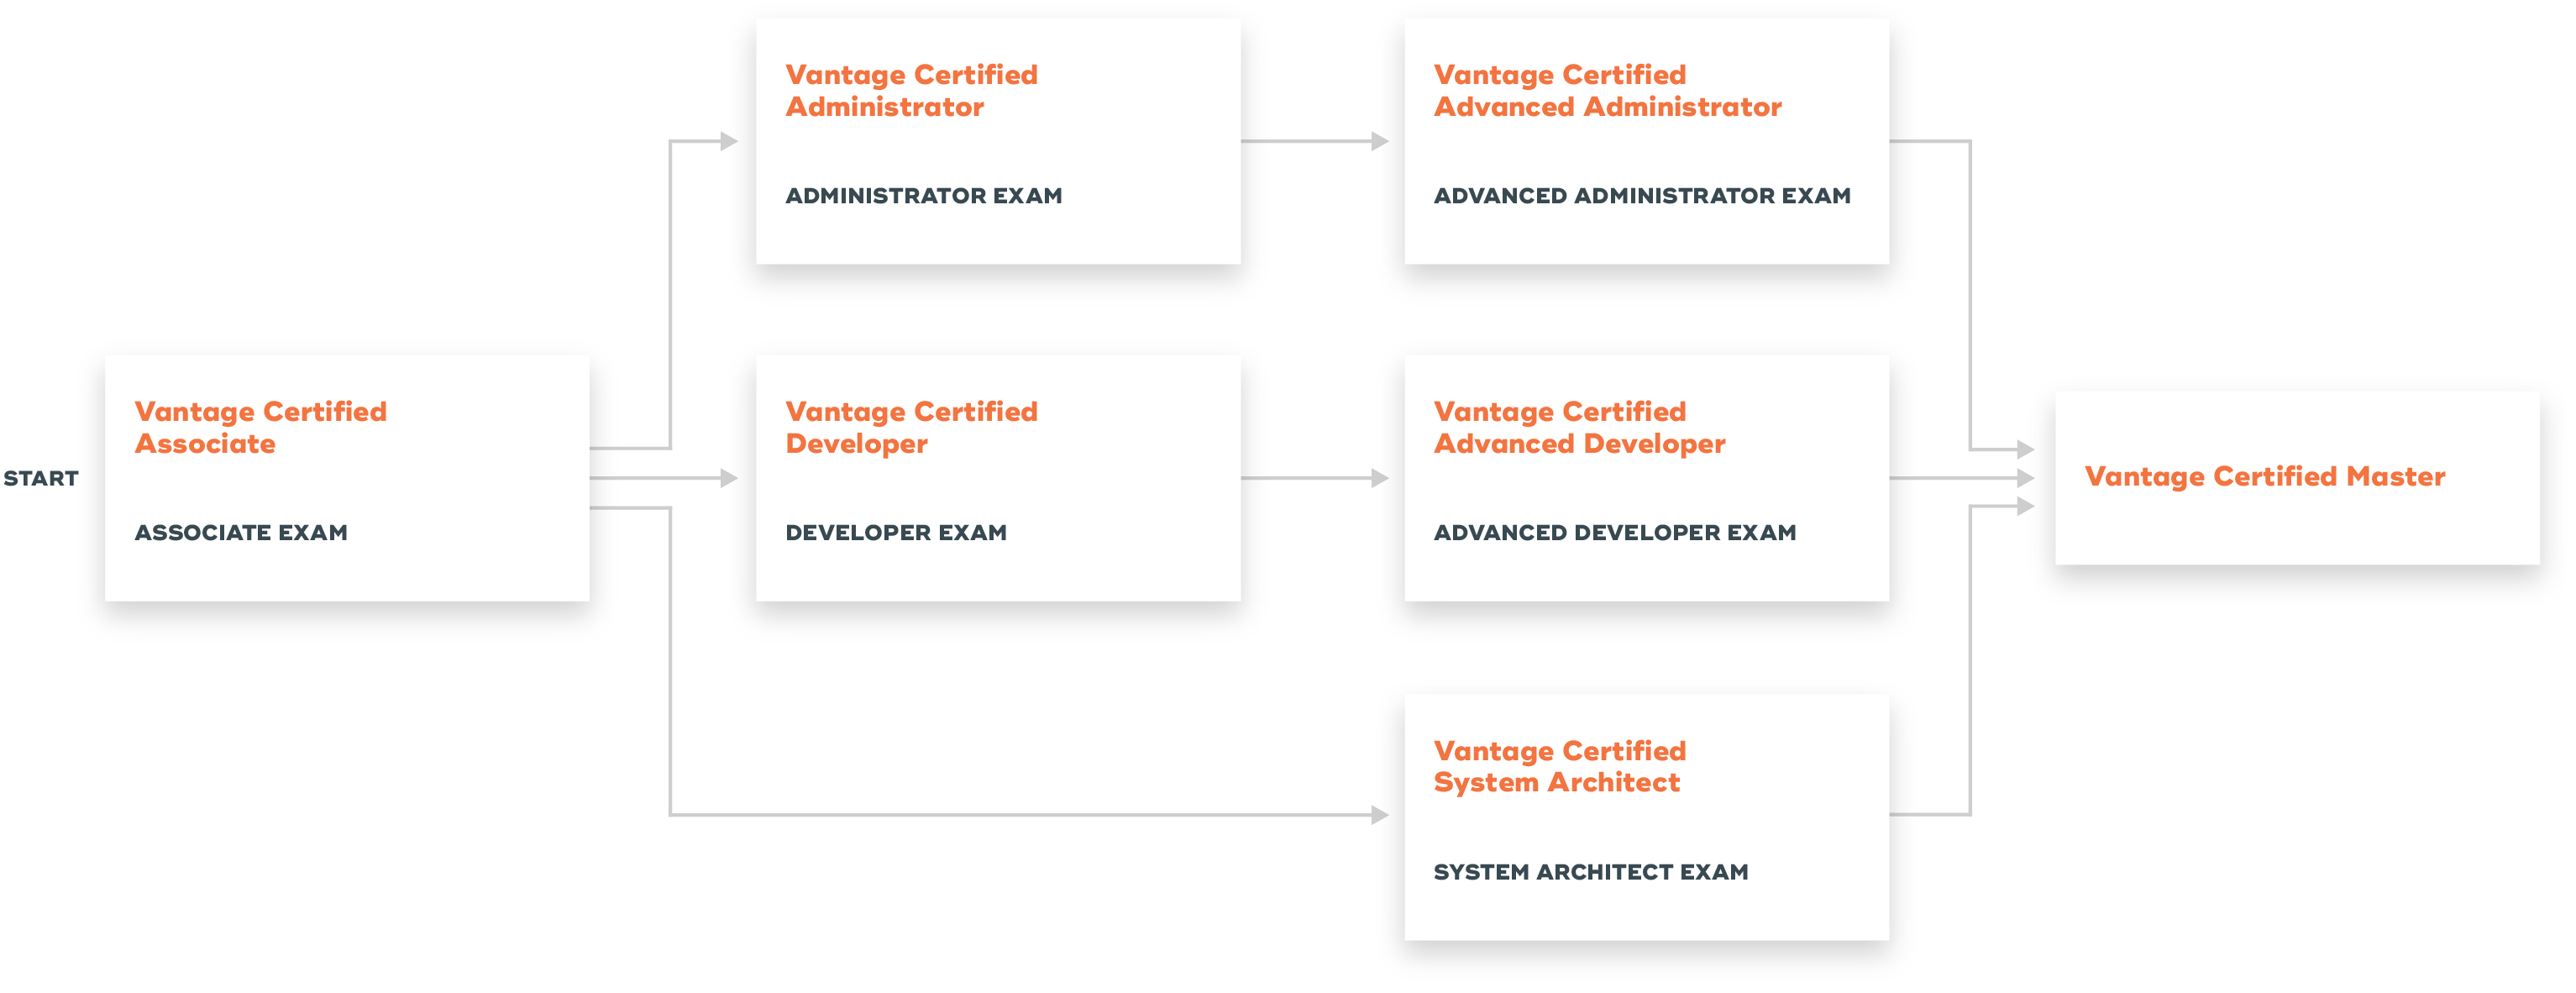 Chart of Teradata Certification paths from Associate to Master